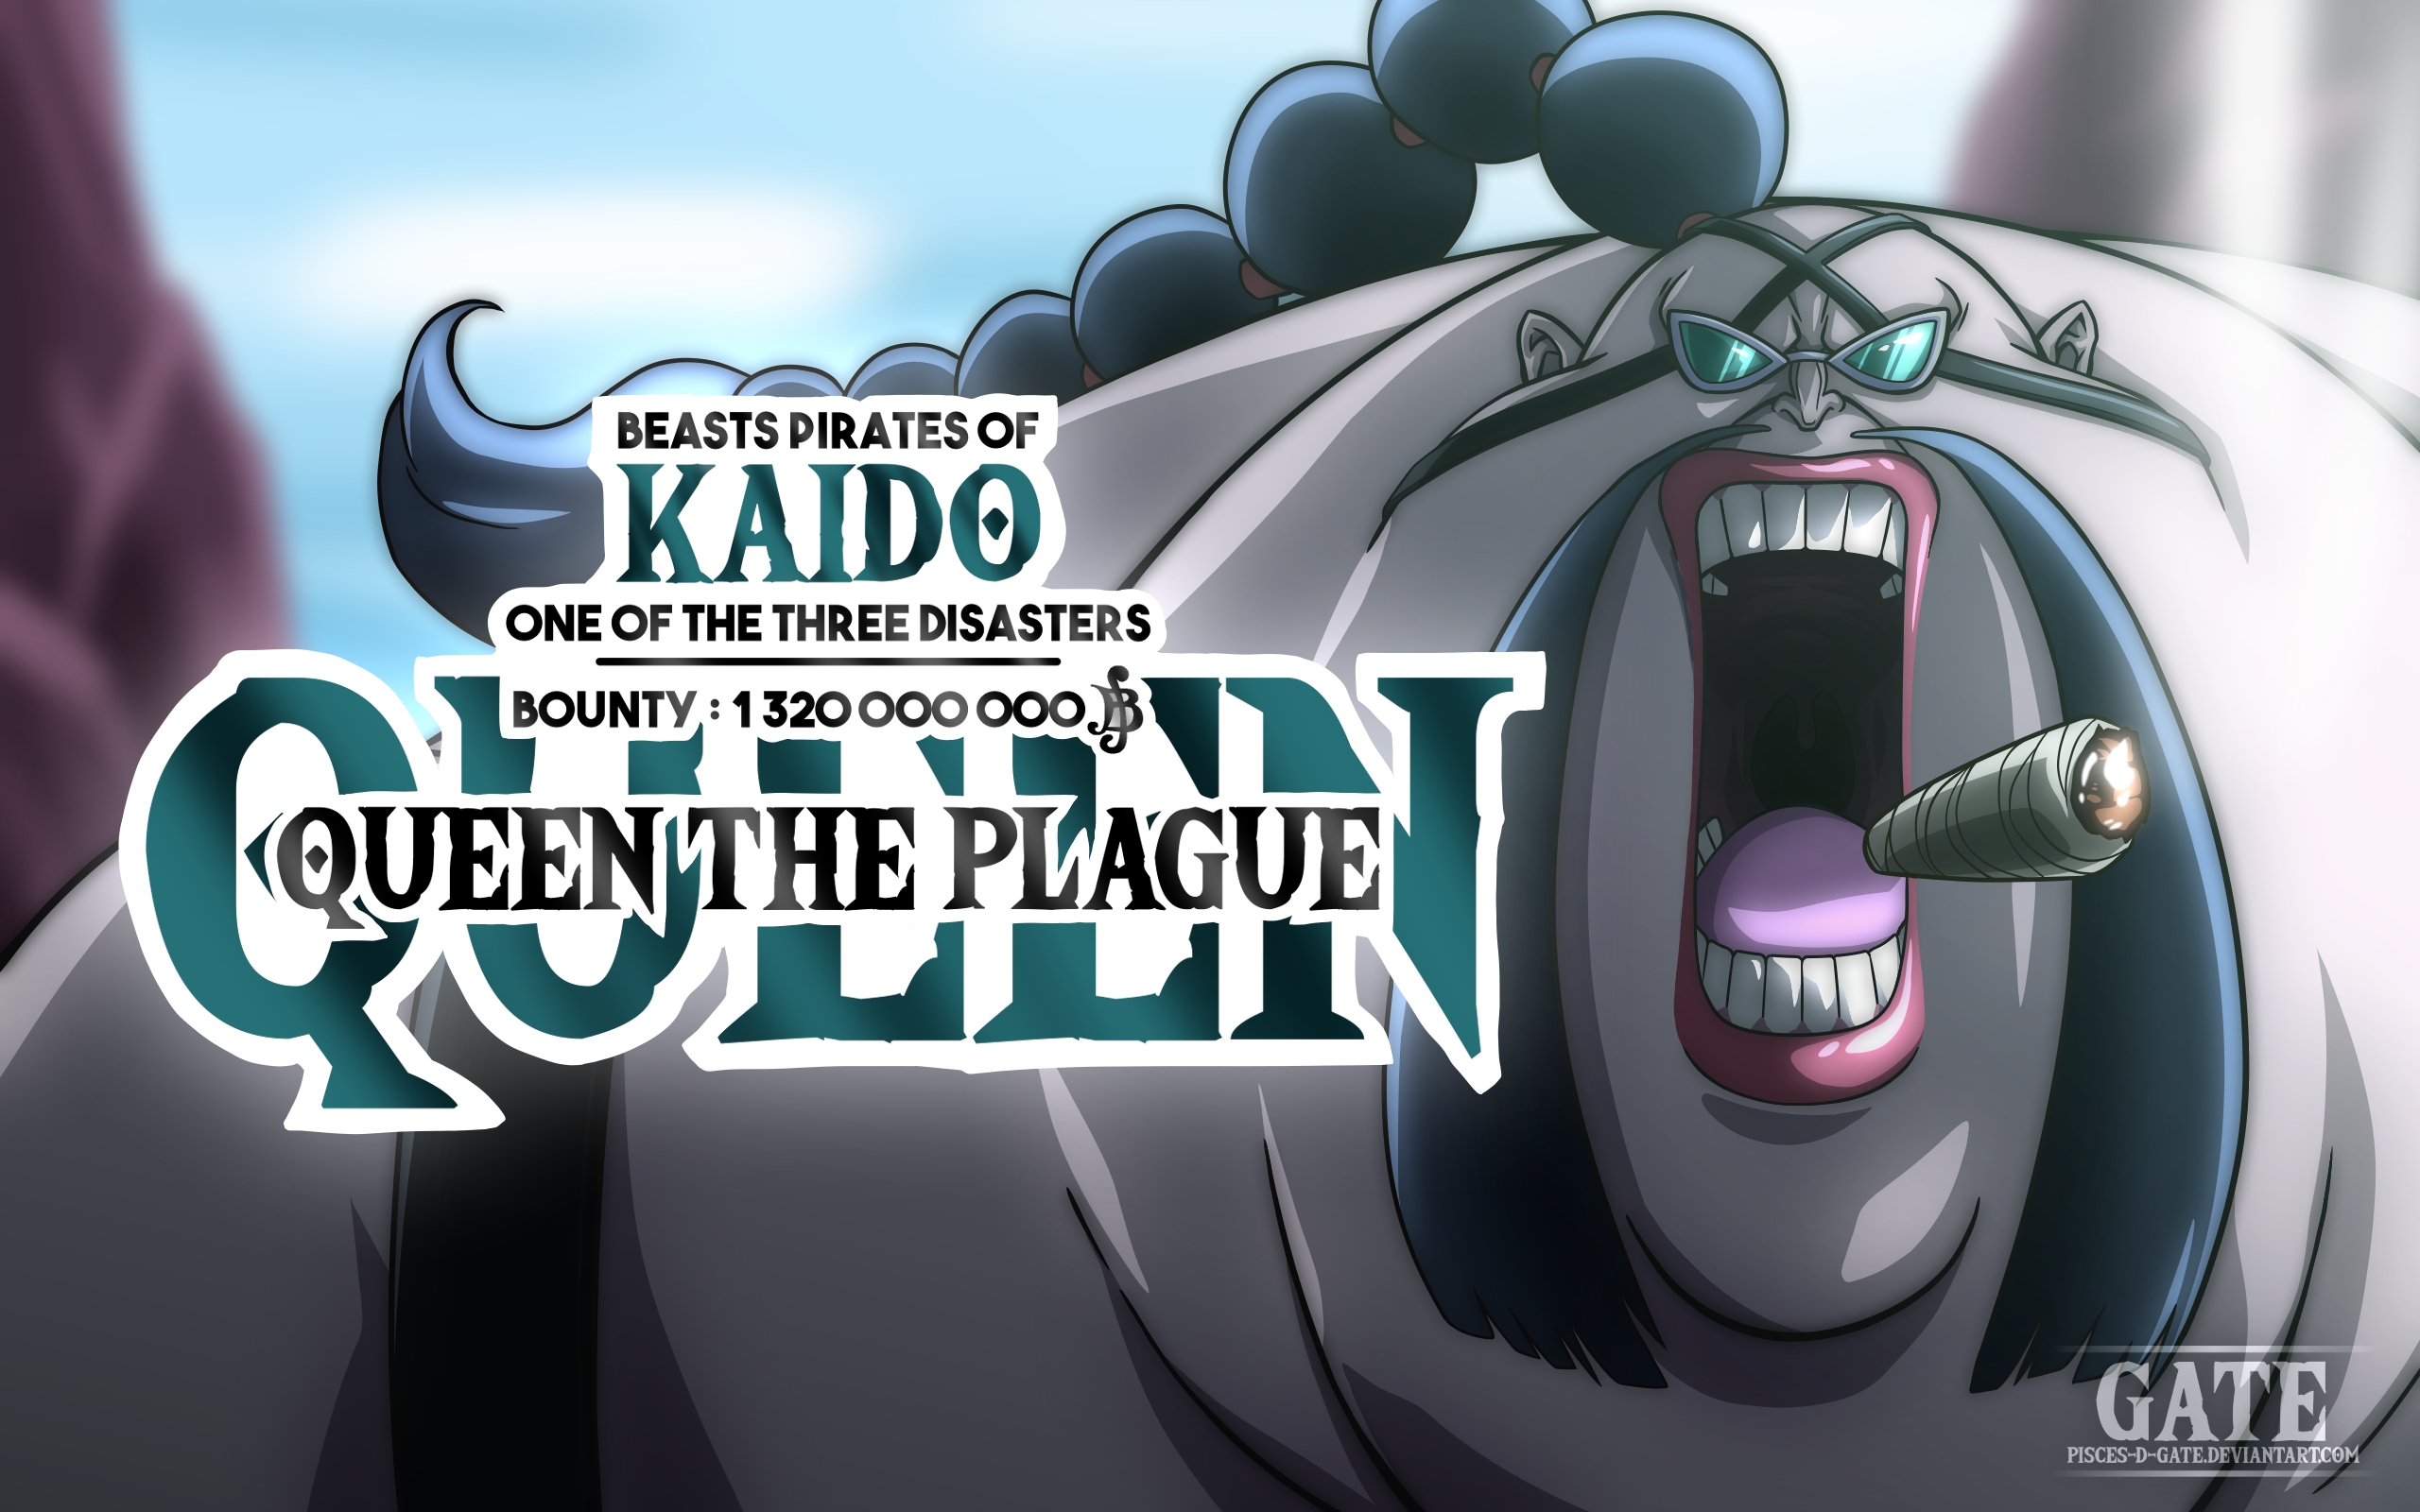 Watch One Piece Episode 930: The Arrival of Queen the Plague!